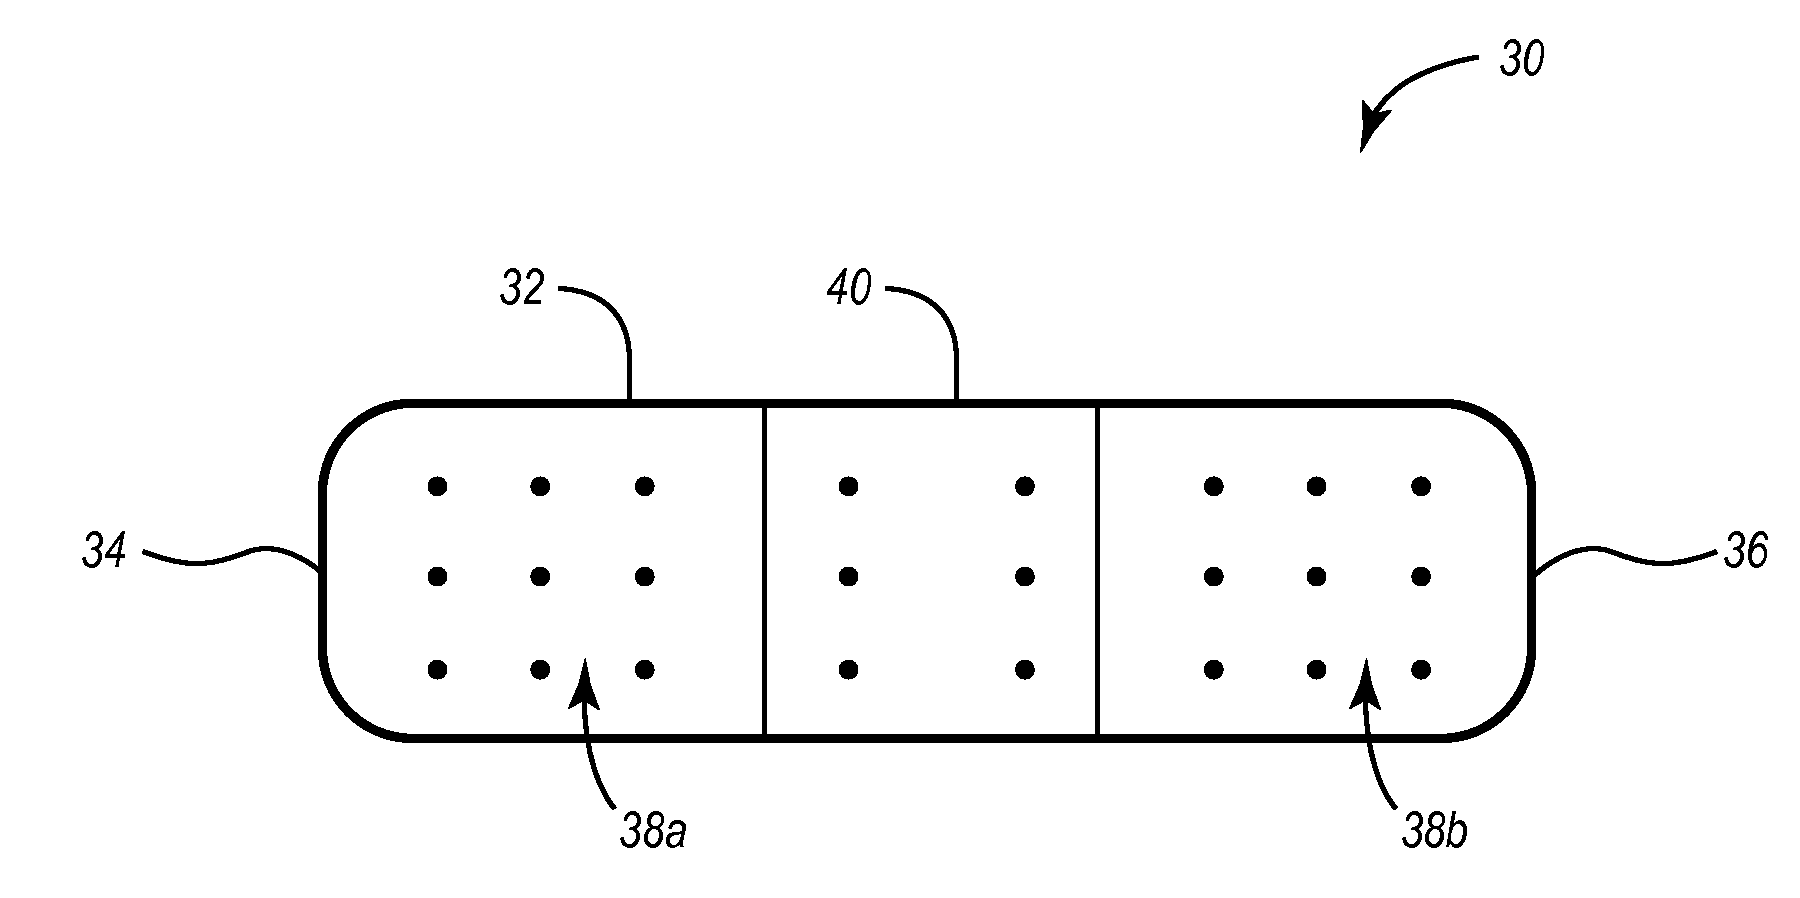 Articles incorporating absorbent polymer and ceragenin compound